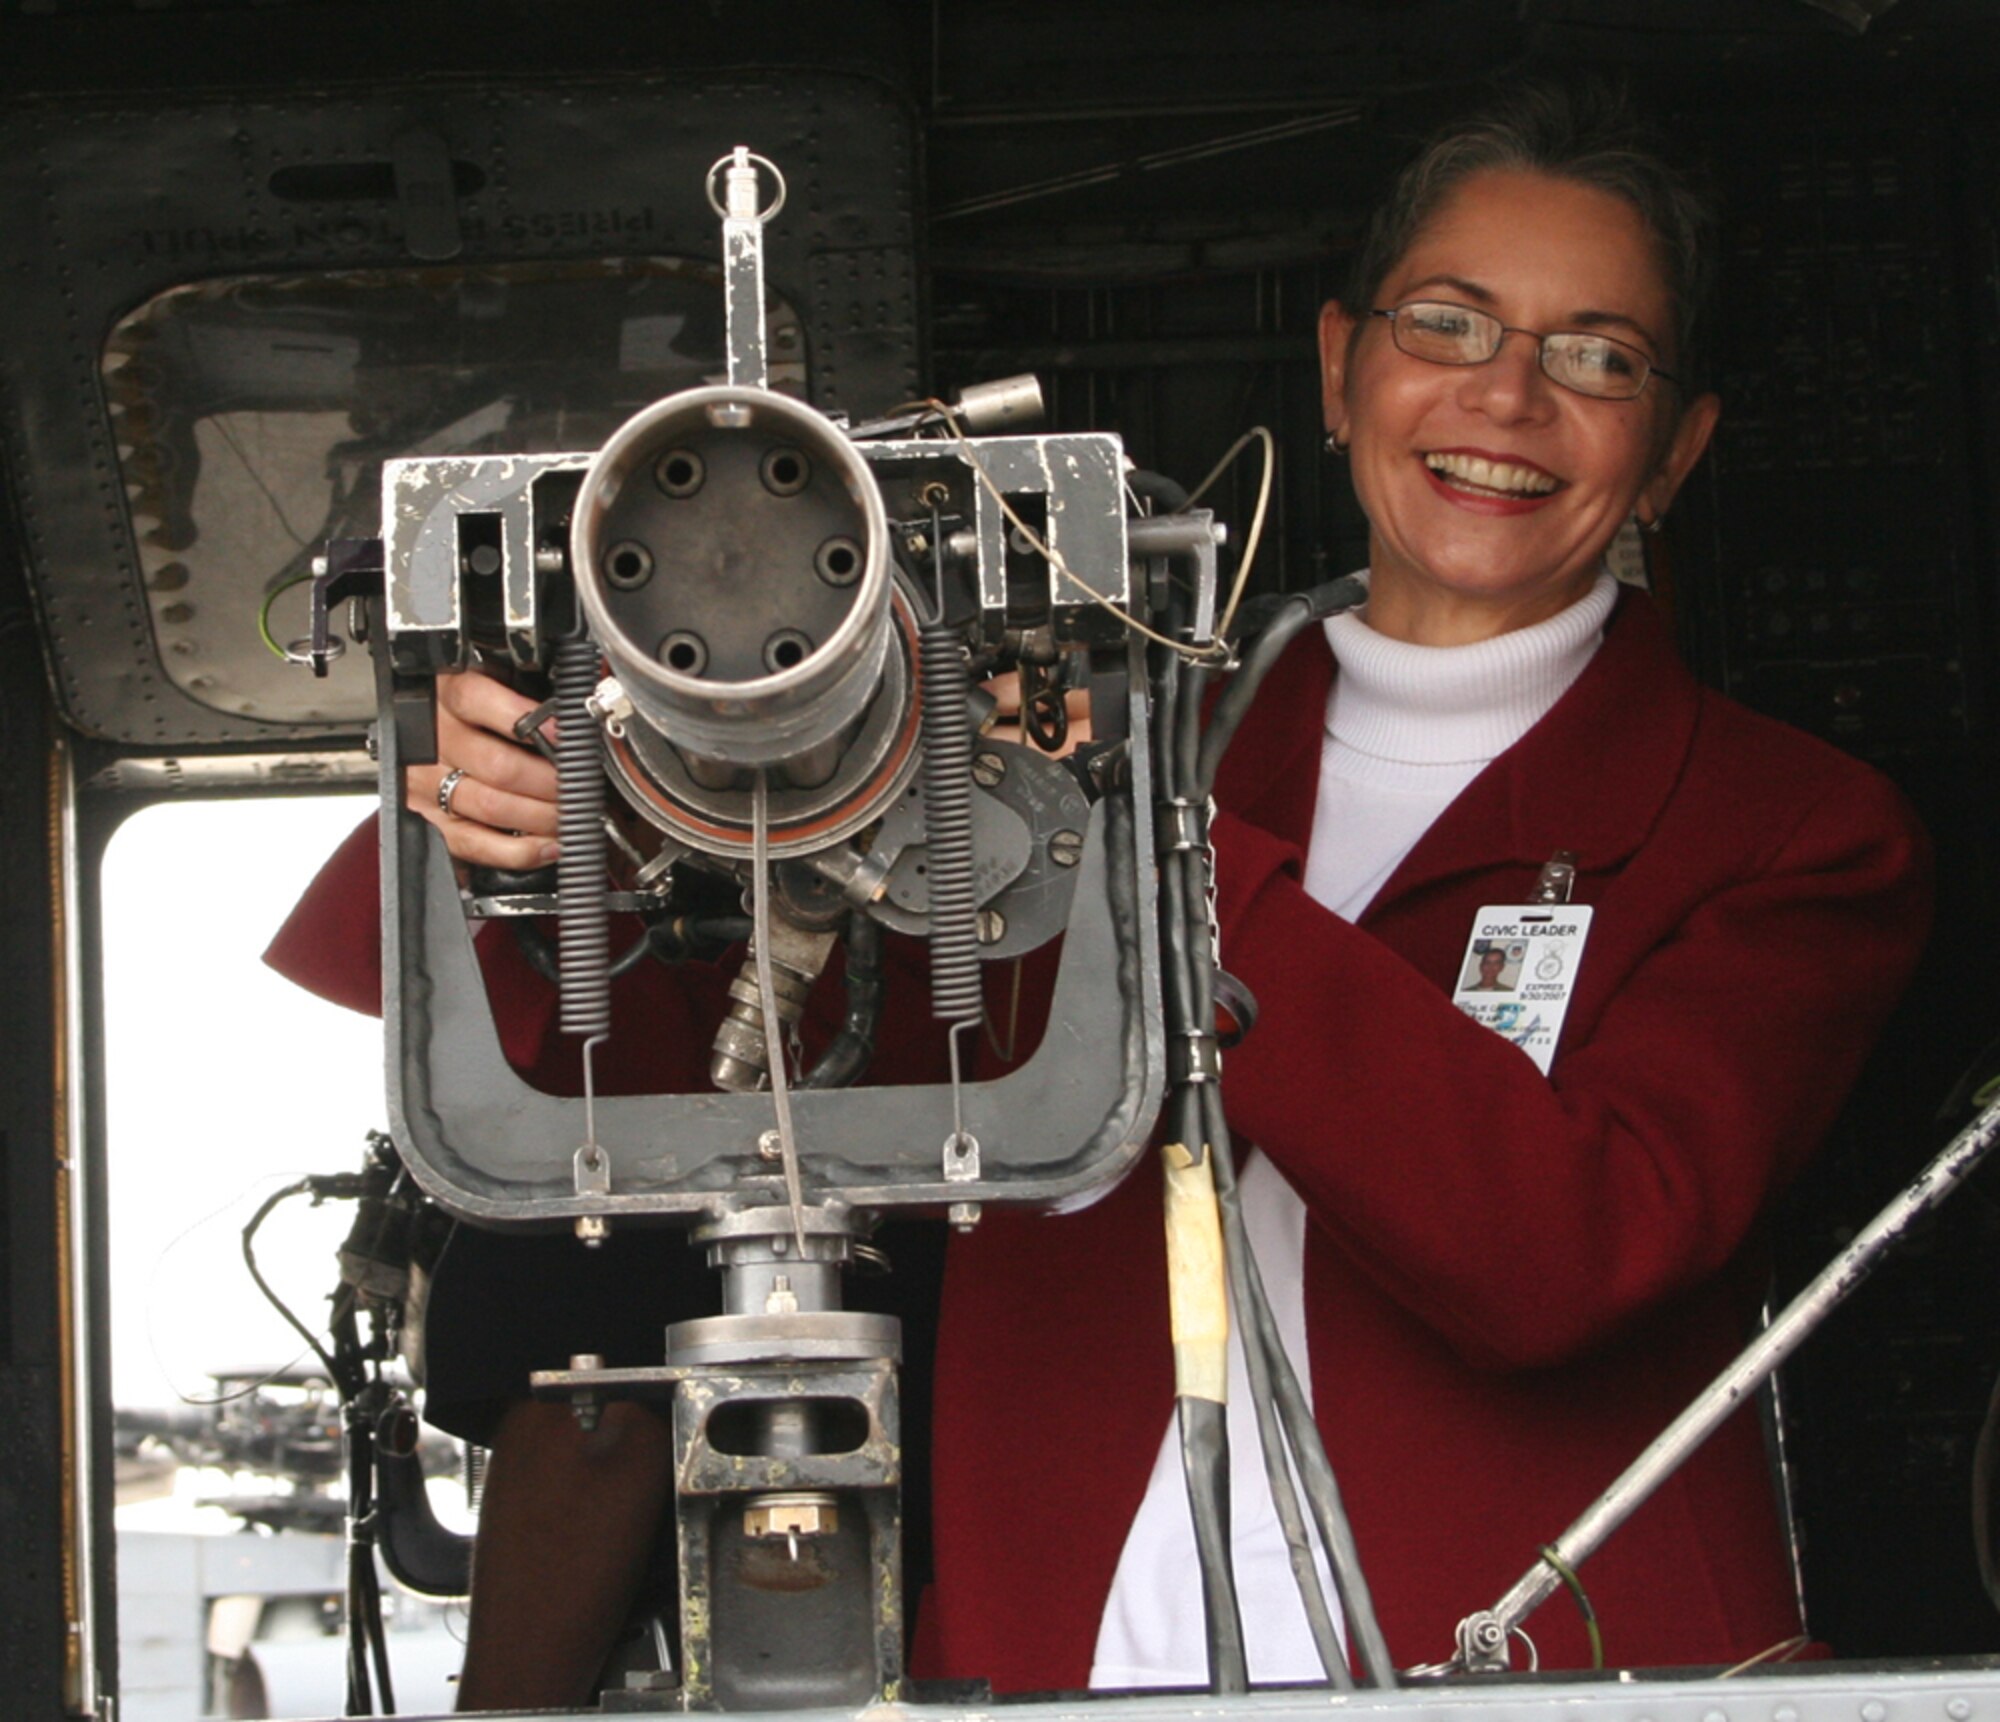 Carla Reinlie, 1st SOW honorary commander from Okaloosa-Walton College, shows her skill at handling the gun on an MH-53 PAVE LOW during a tour. (Courtesy photo)